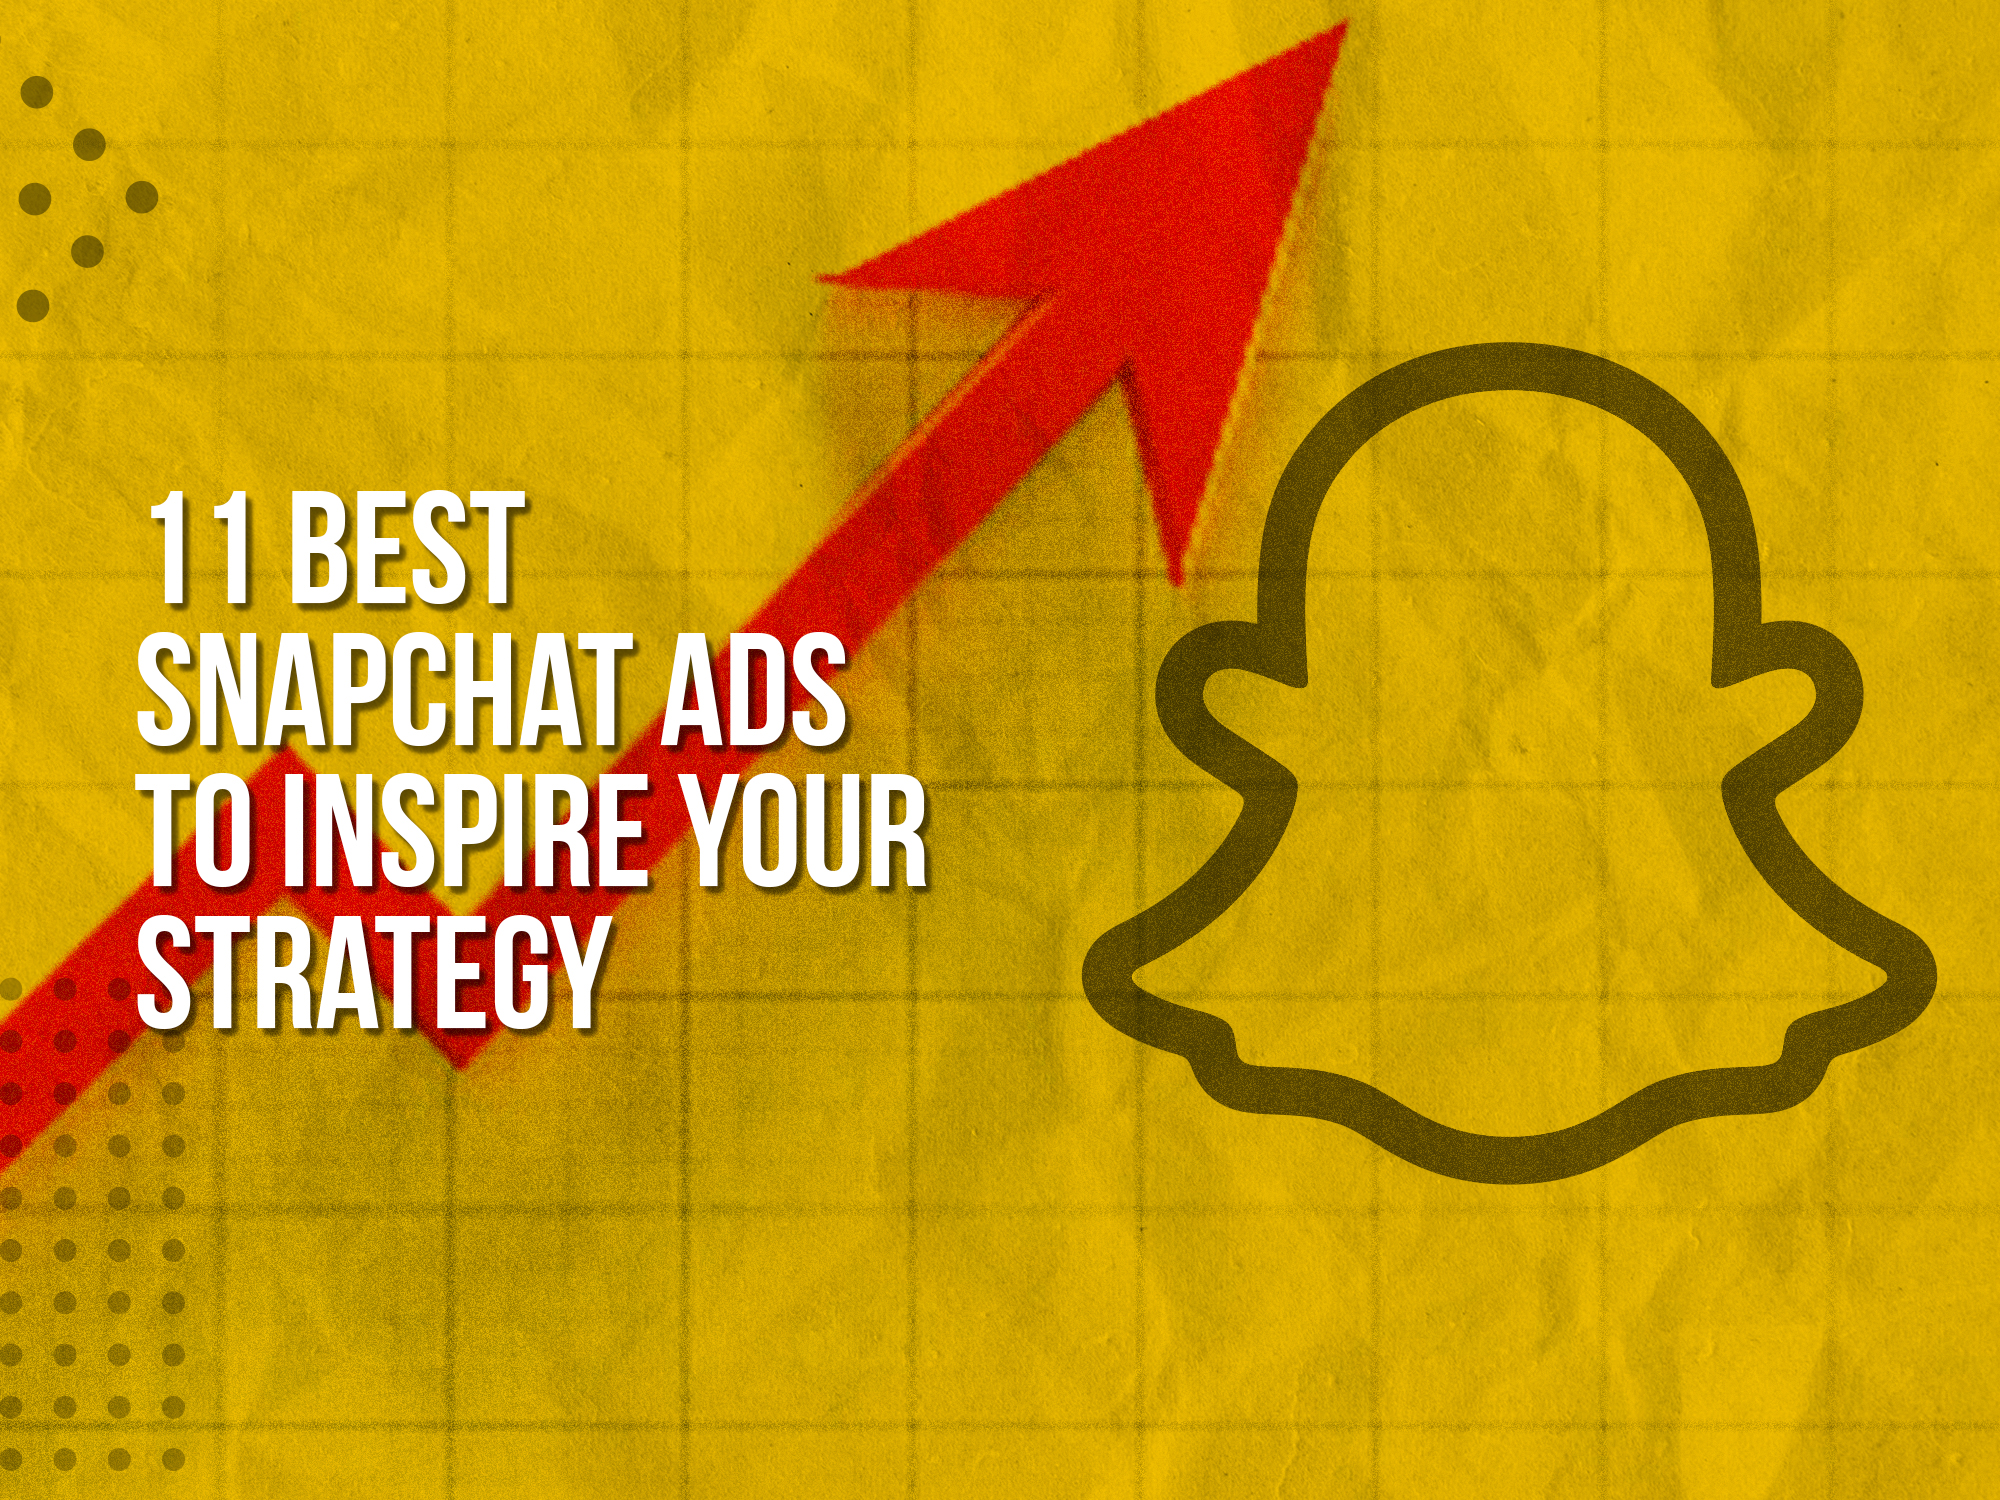 11 Best Snapchat Ads To Inspire Your Strategy